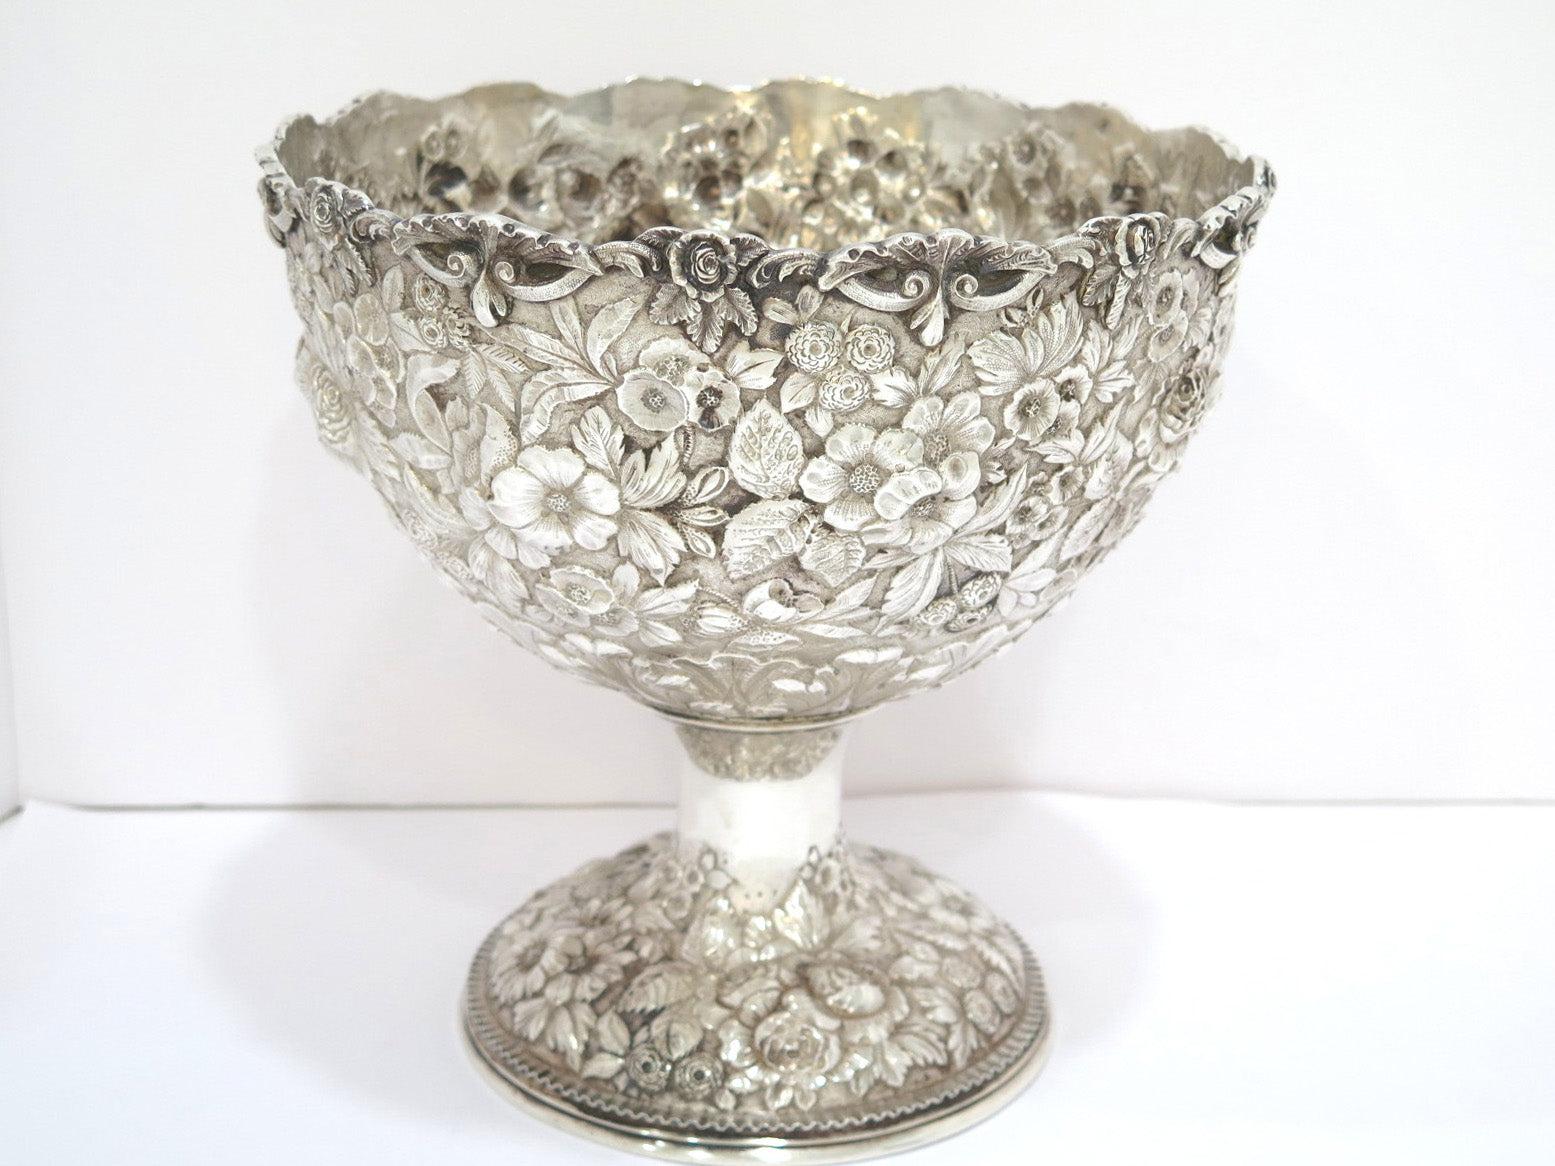 American Sterling Silver Justis & Armiger Antique Floral Repousse Footed Bowl For Sale